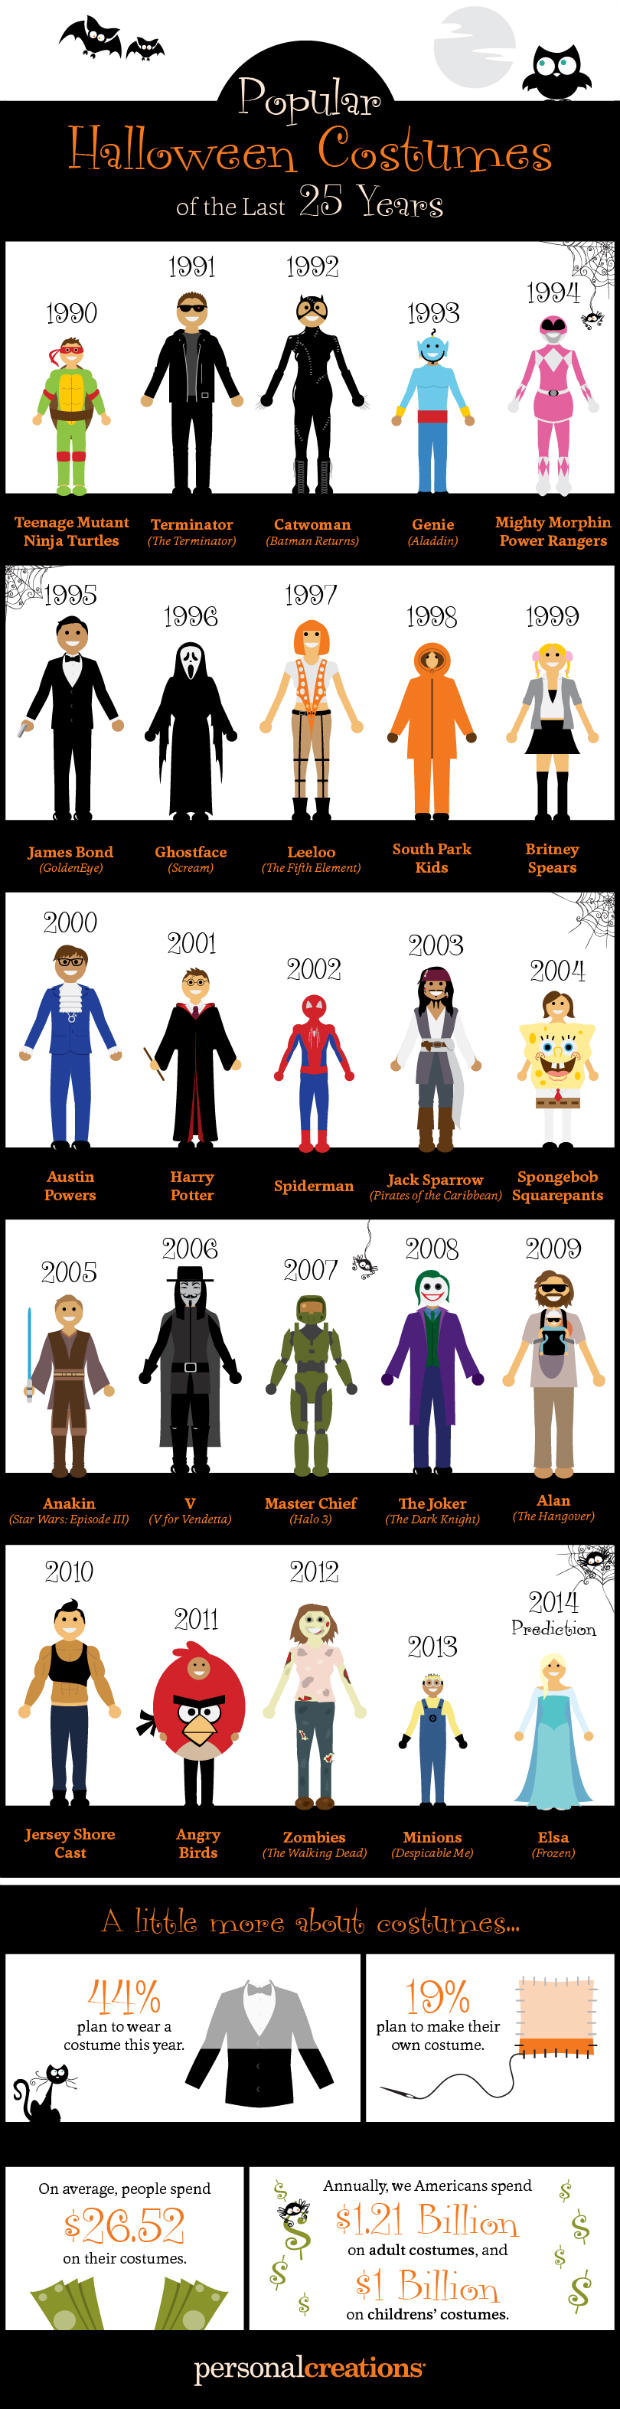 25-years-costumes_resized